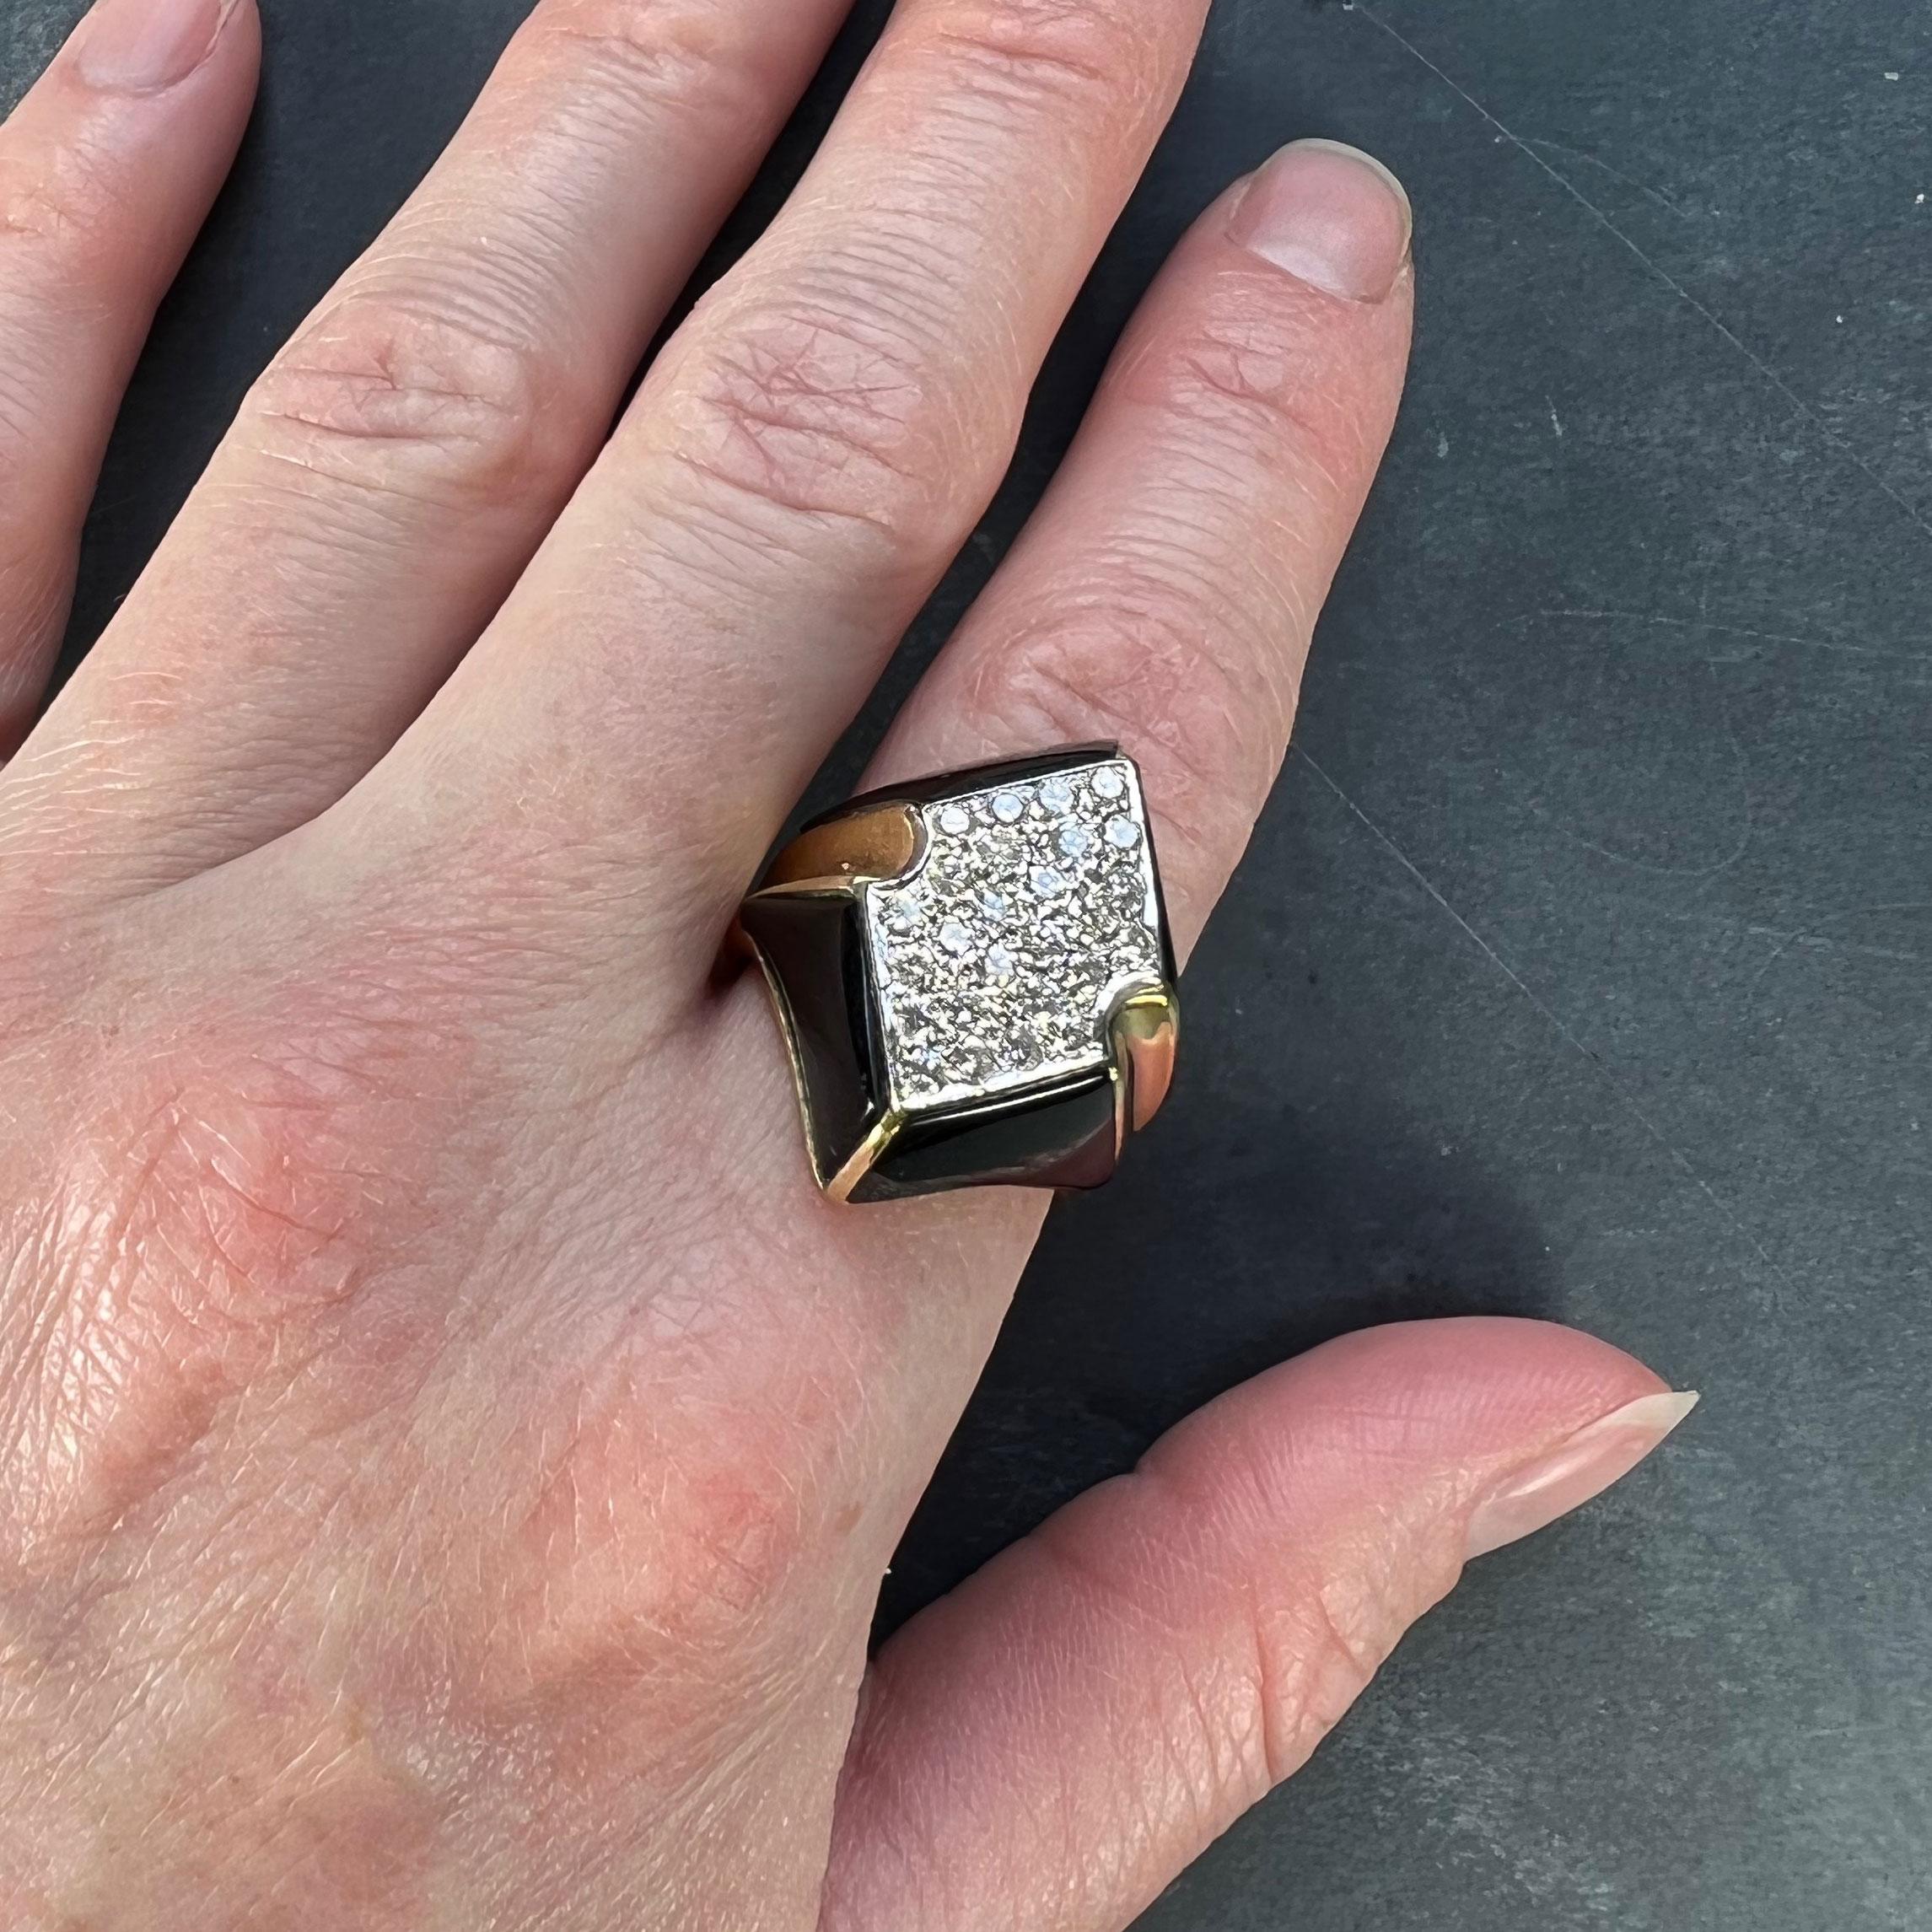 A very smart 18 karat yellow gold cocktail ring set with a panel of 26 white diamonds with a total approximate weight of 1.56 carats to an onyx panel surround. 

Ring Size: 7 (US), N (UK)
Dimensions: 2.6 x  2.3 x 2.8 cm
Weight: 11.79 grams
